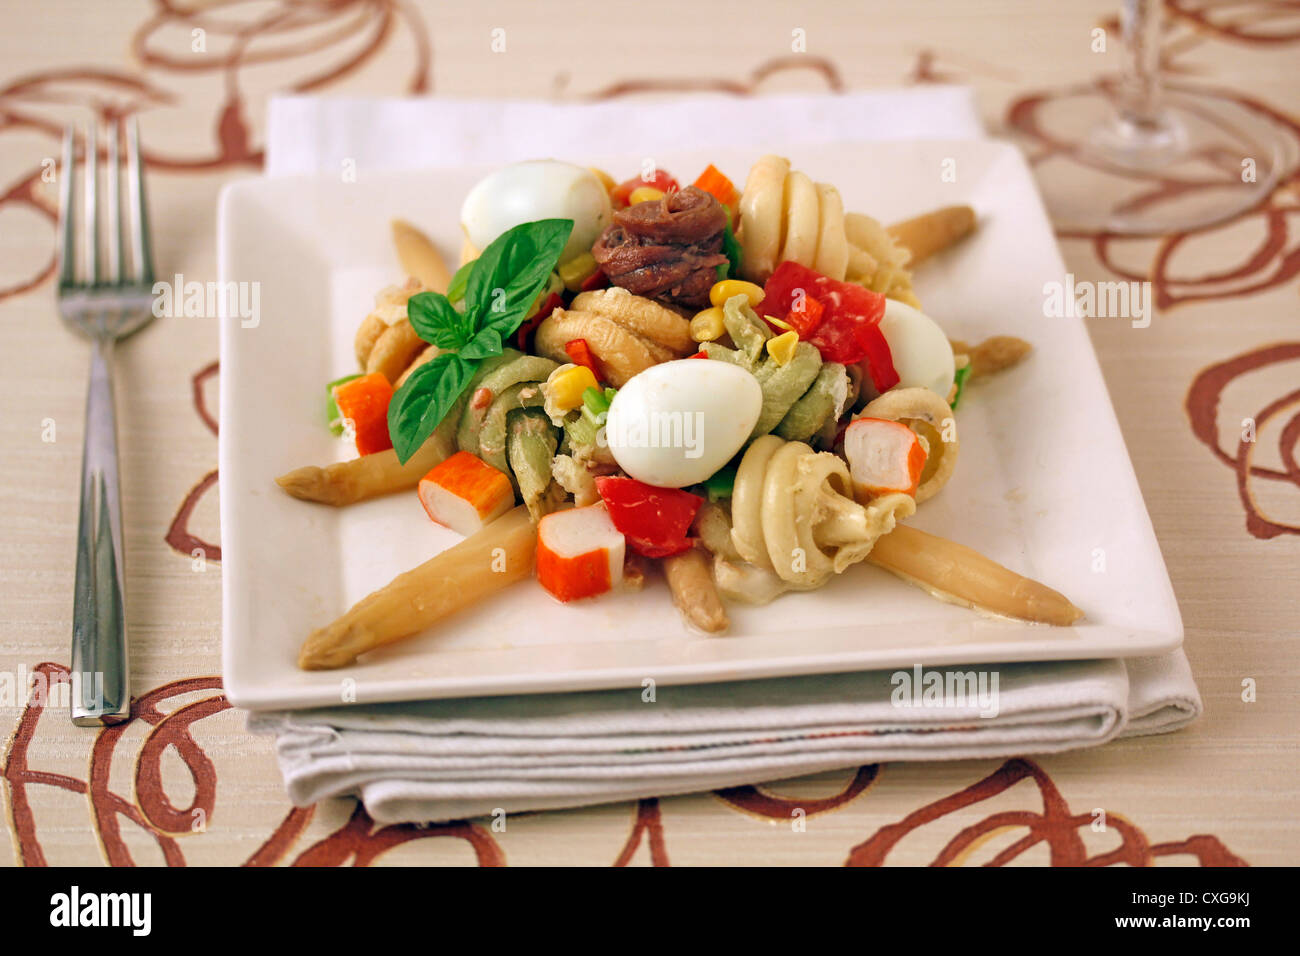 Pasta salad with surimi and eggs of quail. Recipe available. Stock Photo